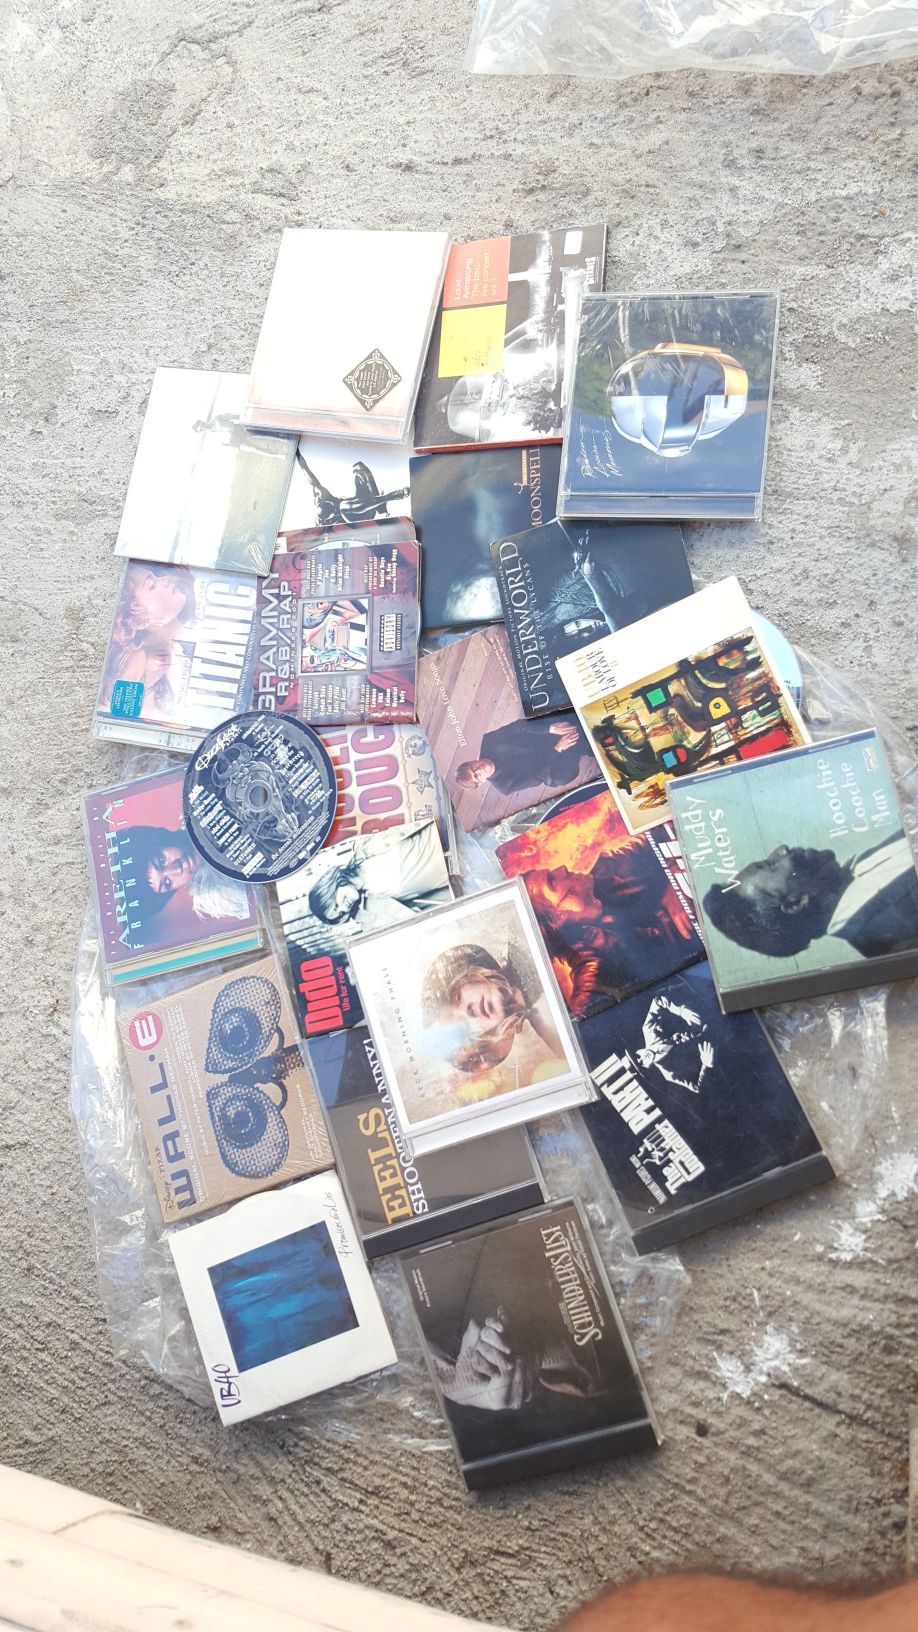 Cds all for $5